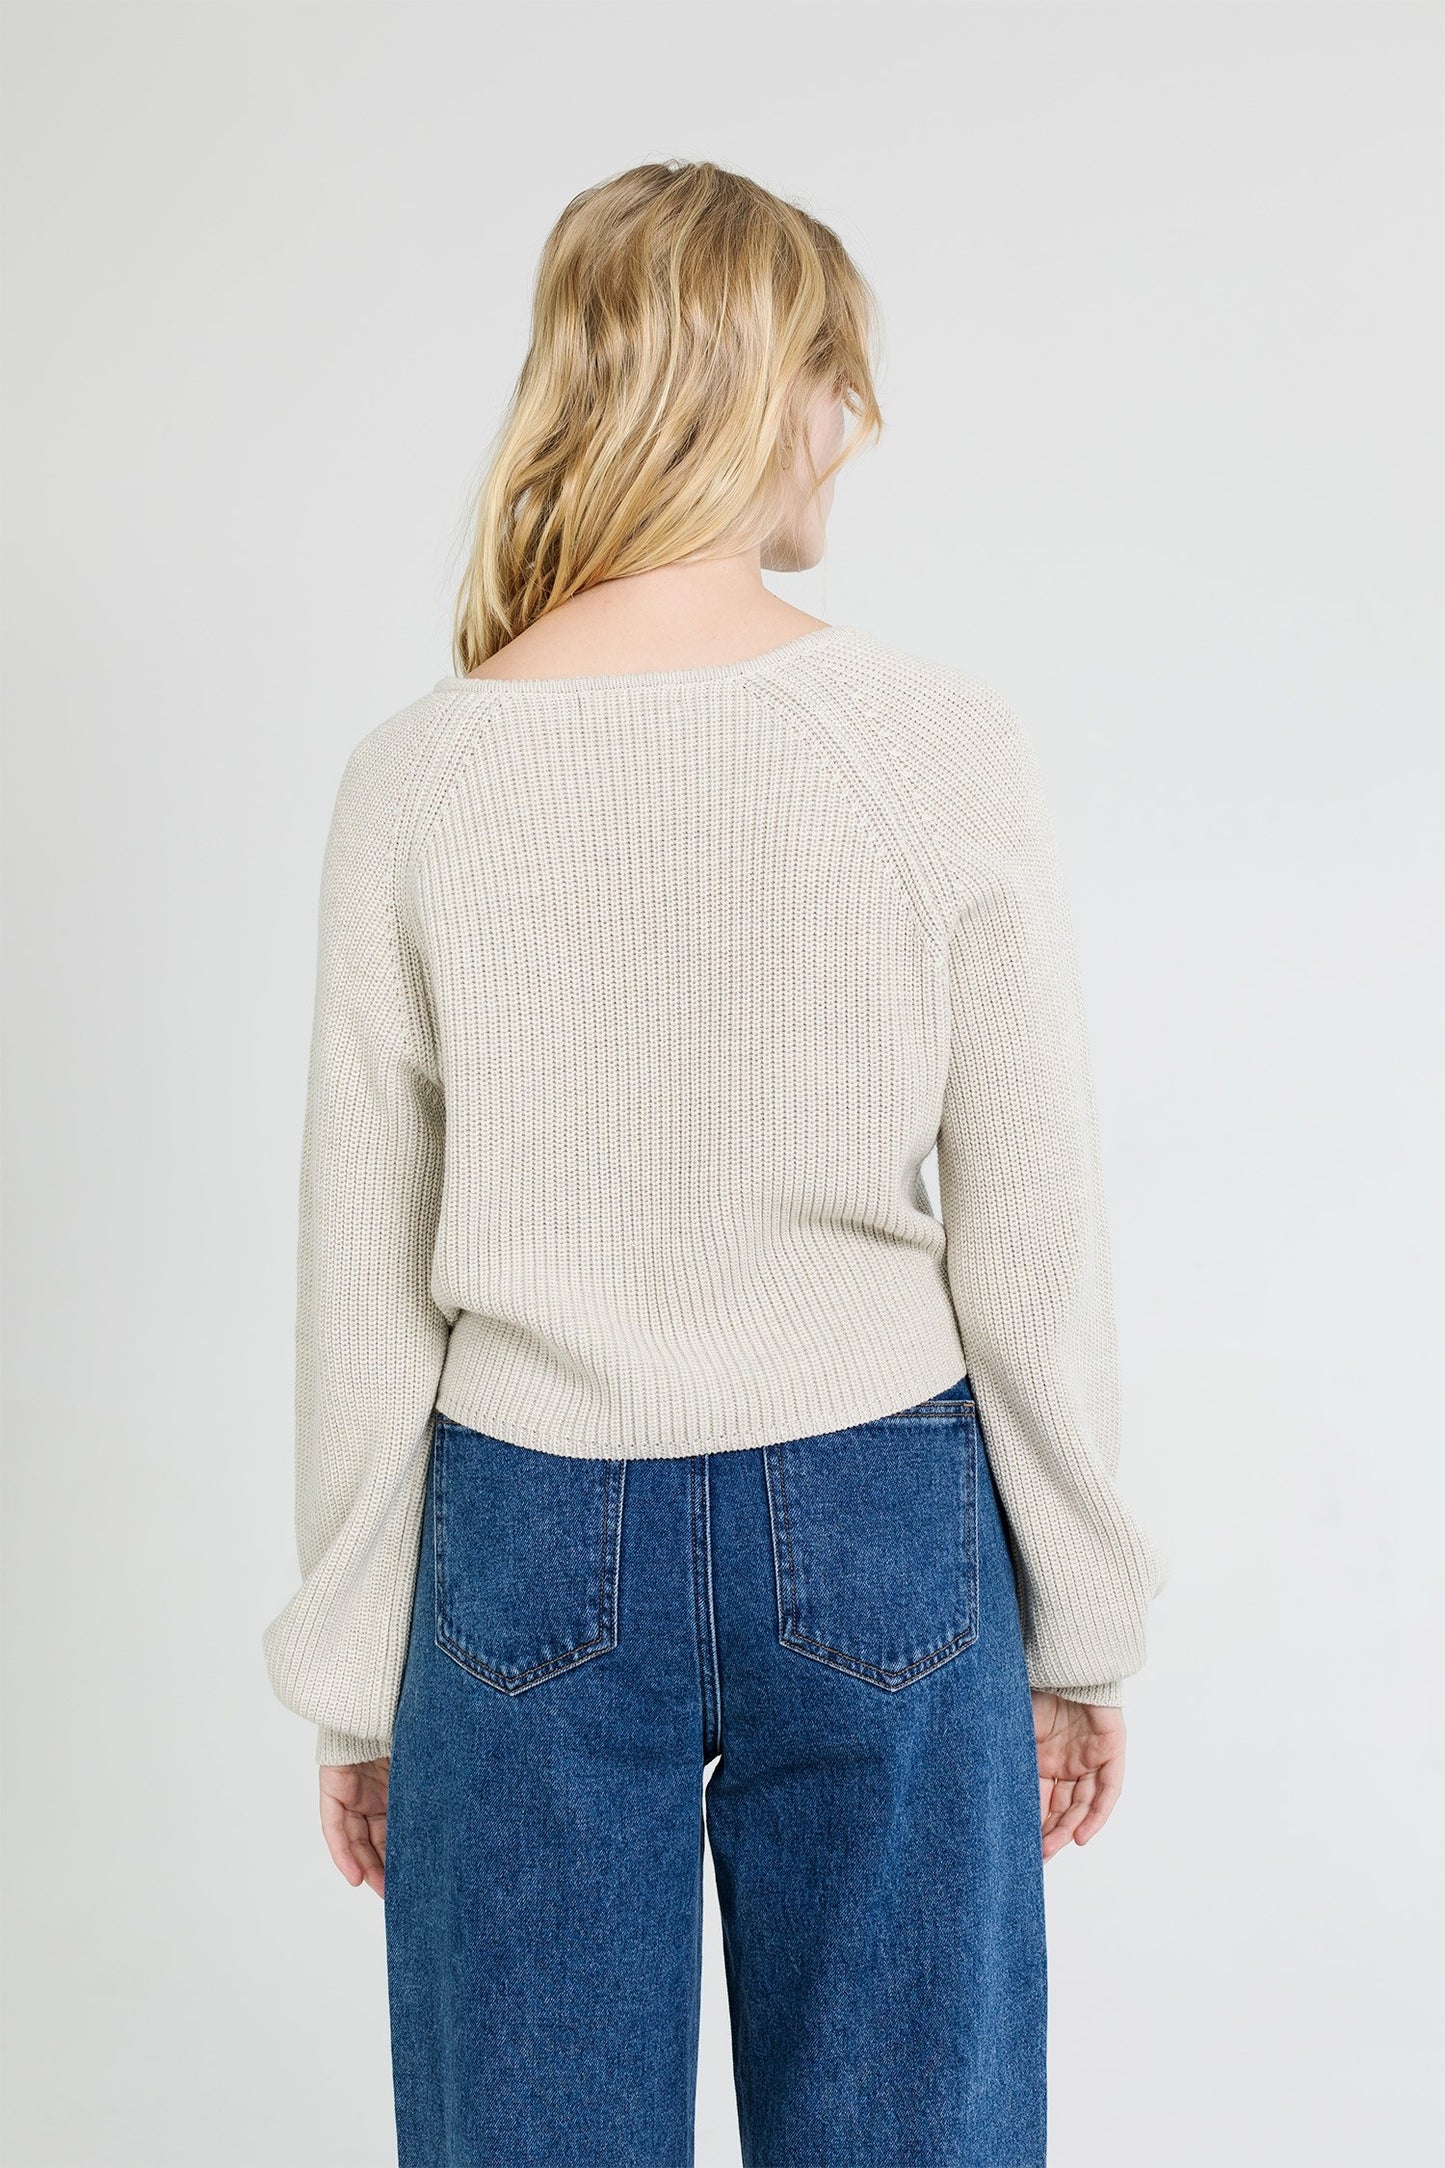 The Baily Sweater